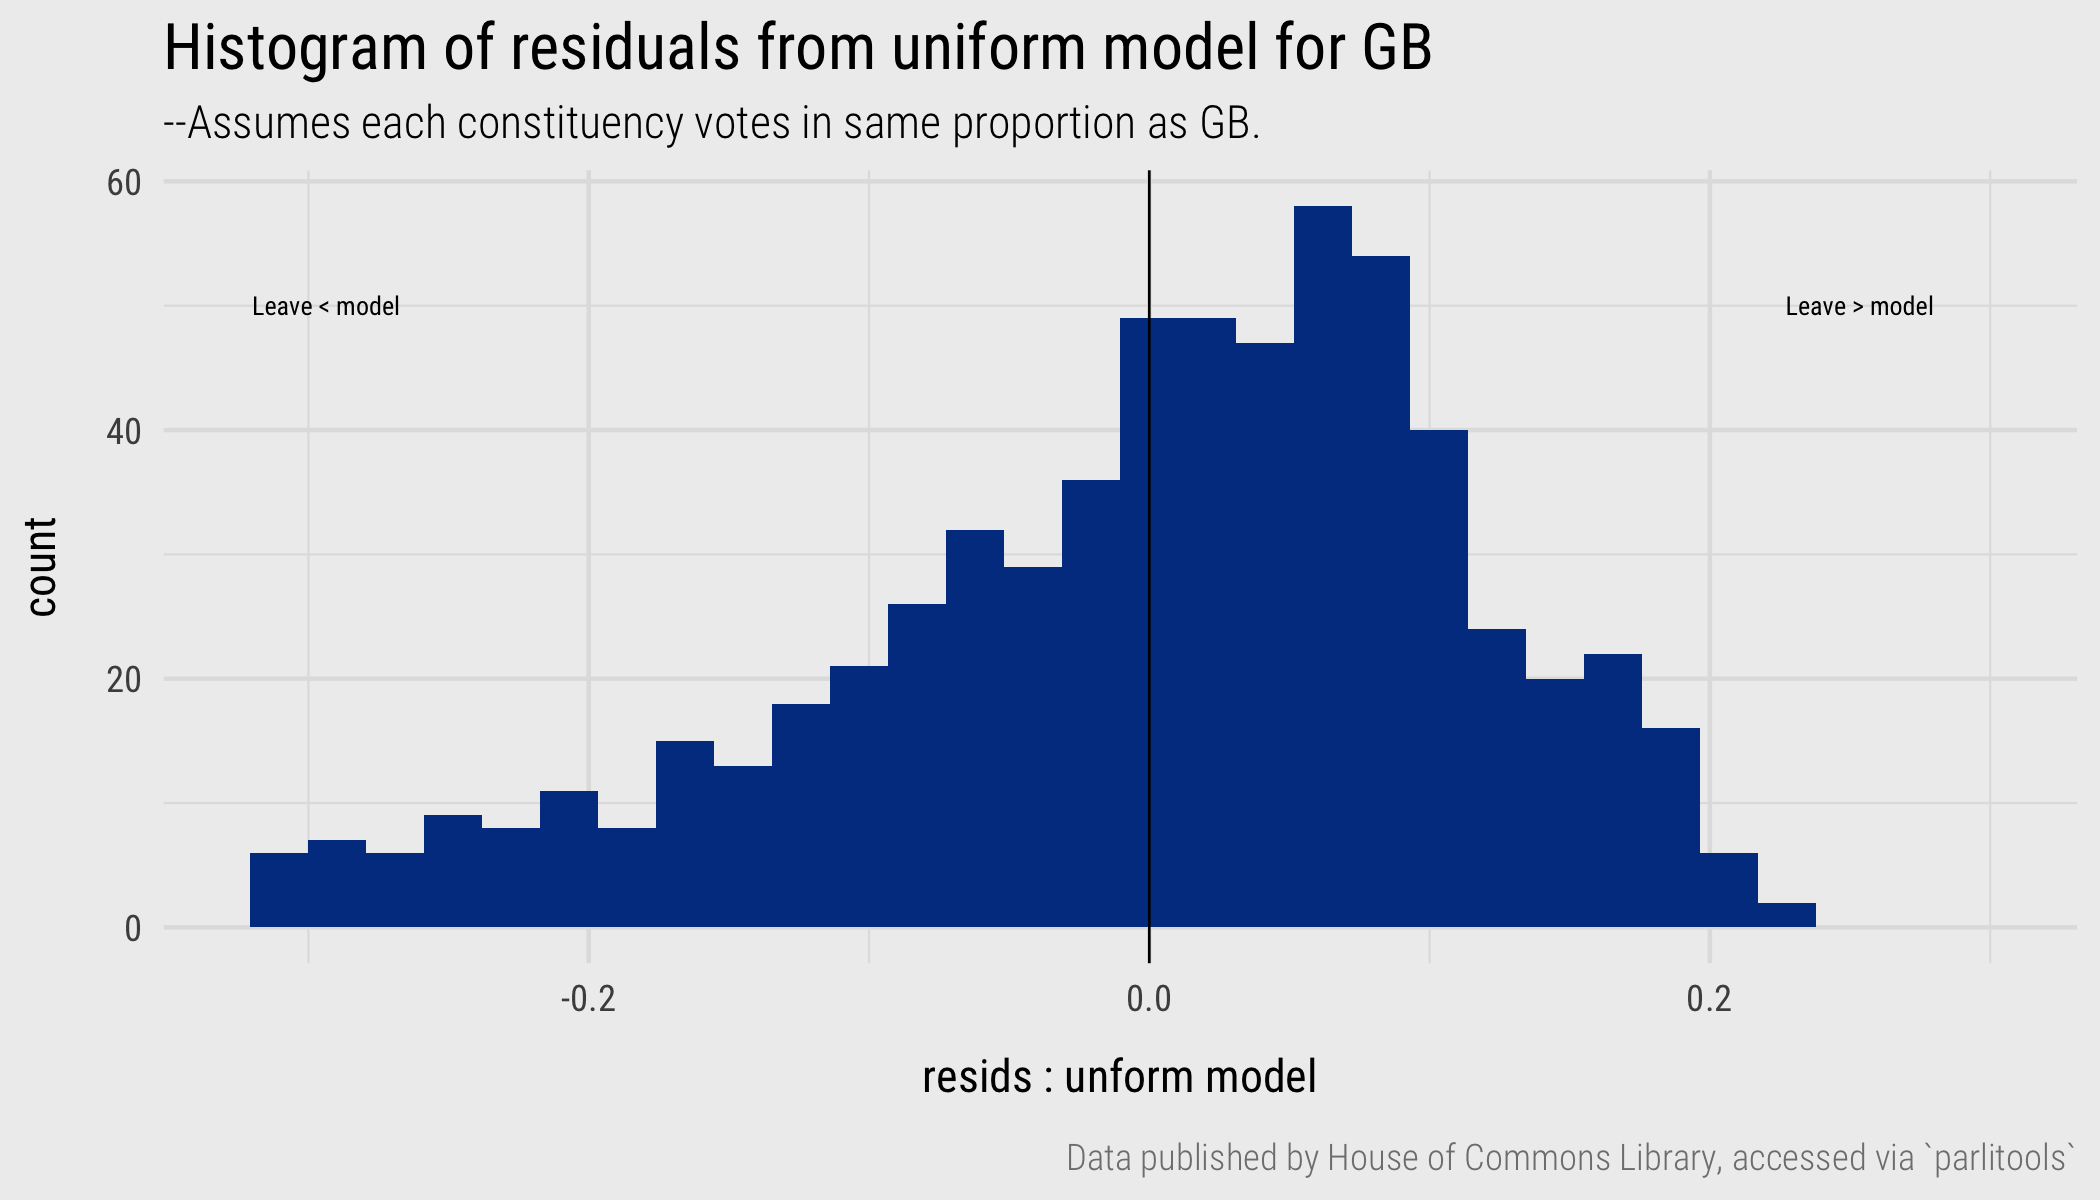 Histogram of residuals from uniform model comparing constituency Leave vote to GB average.